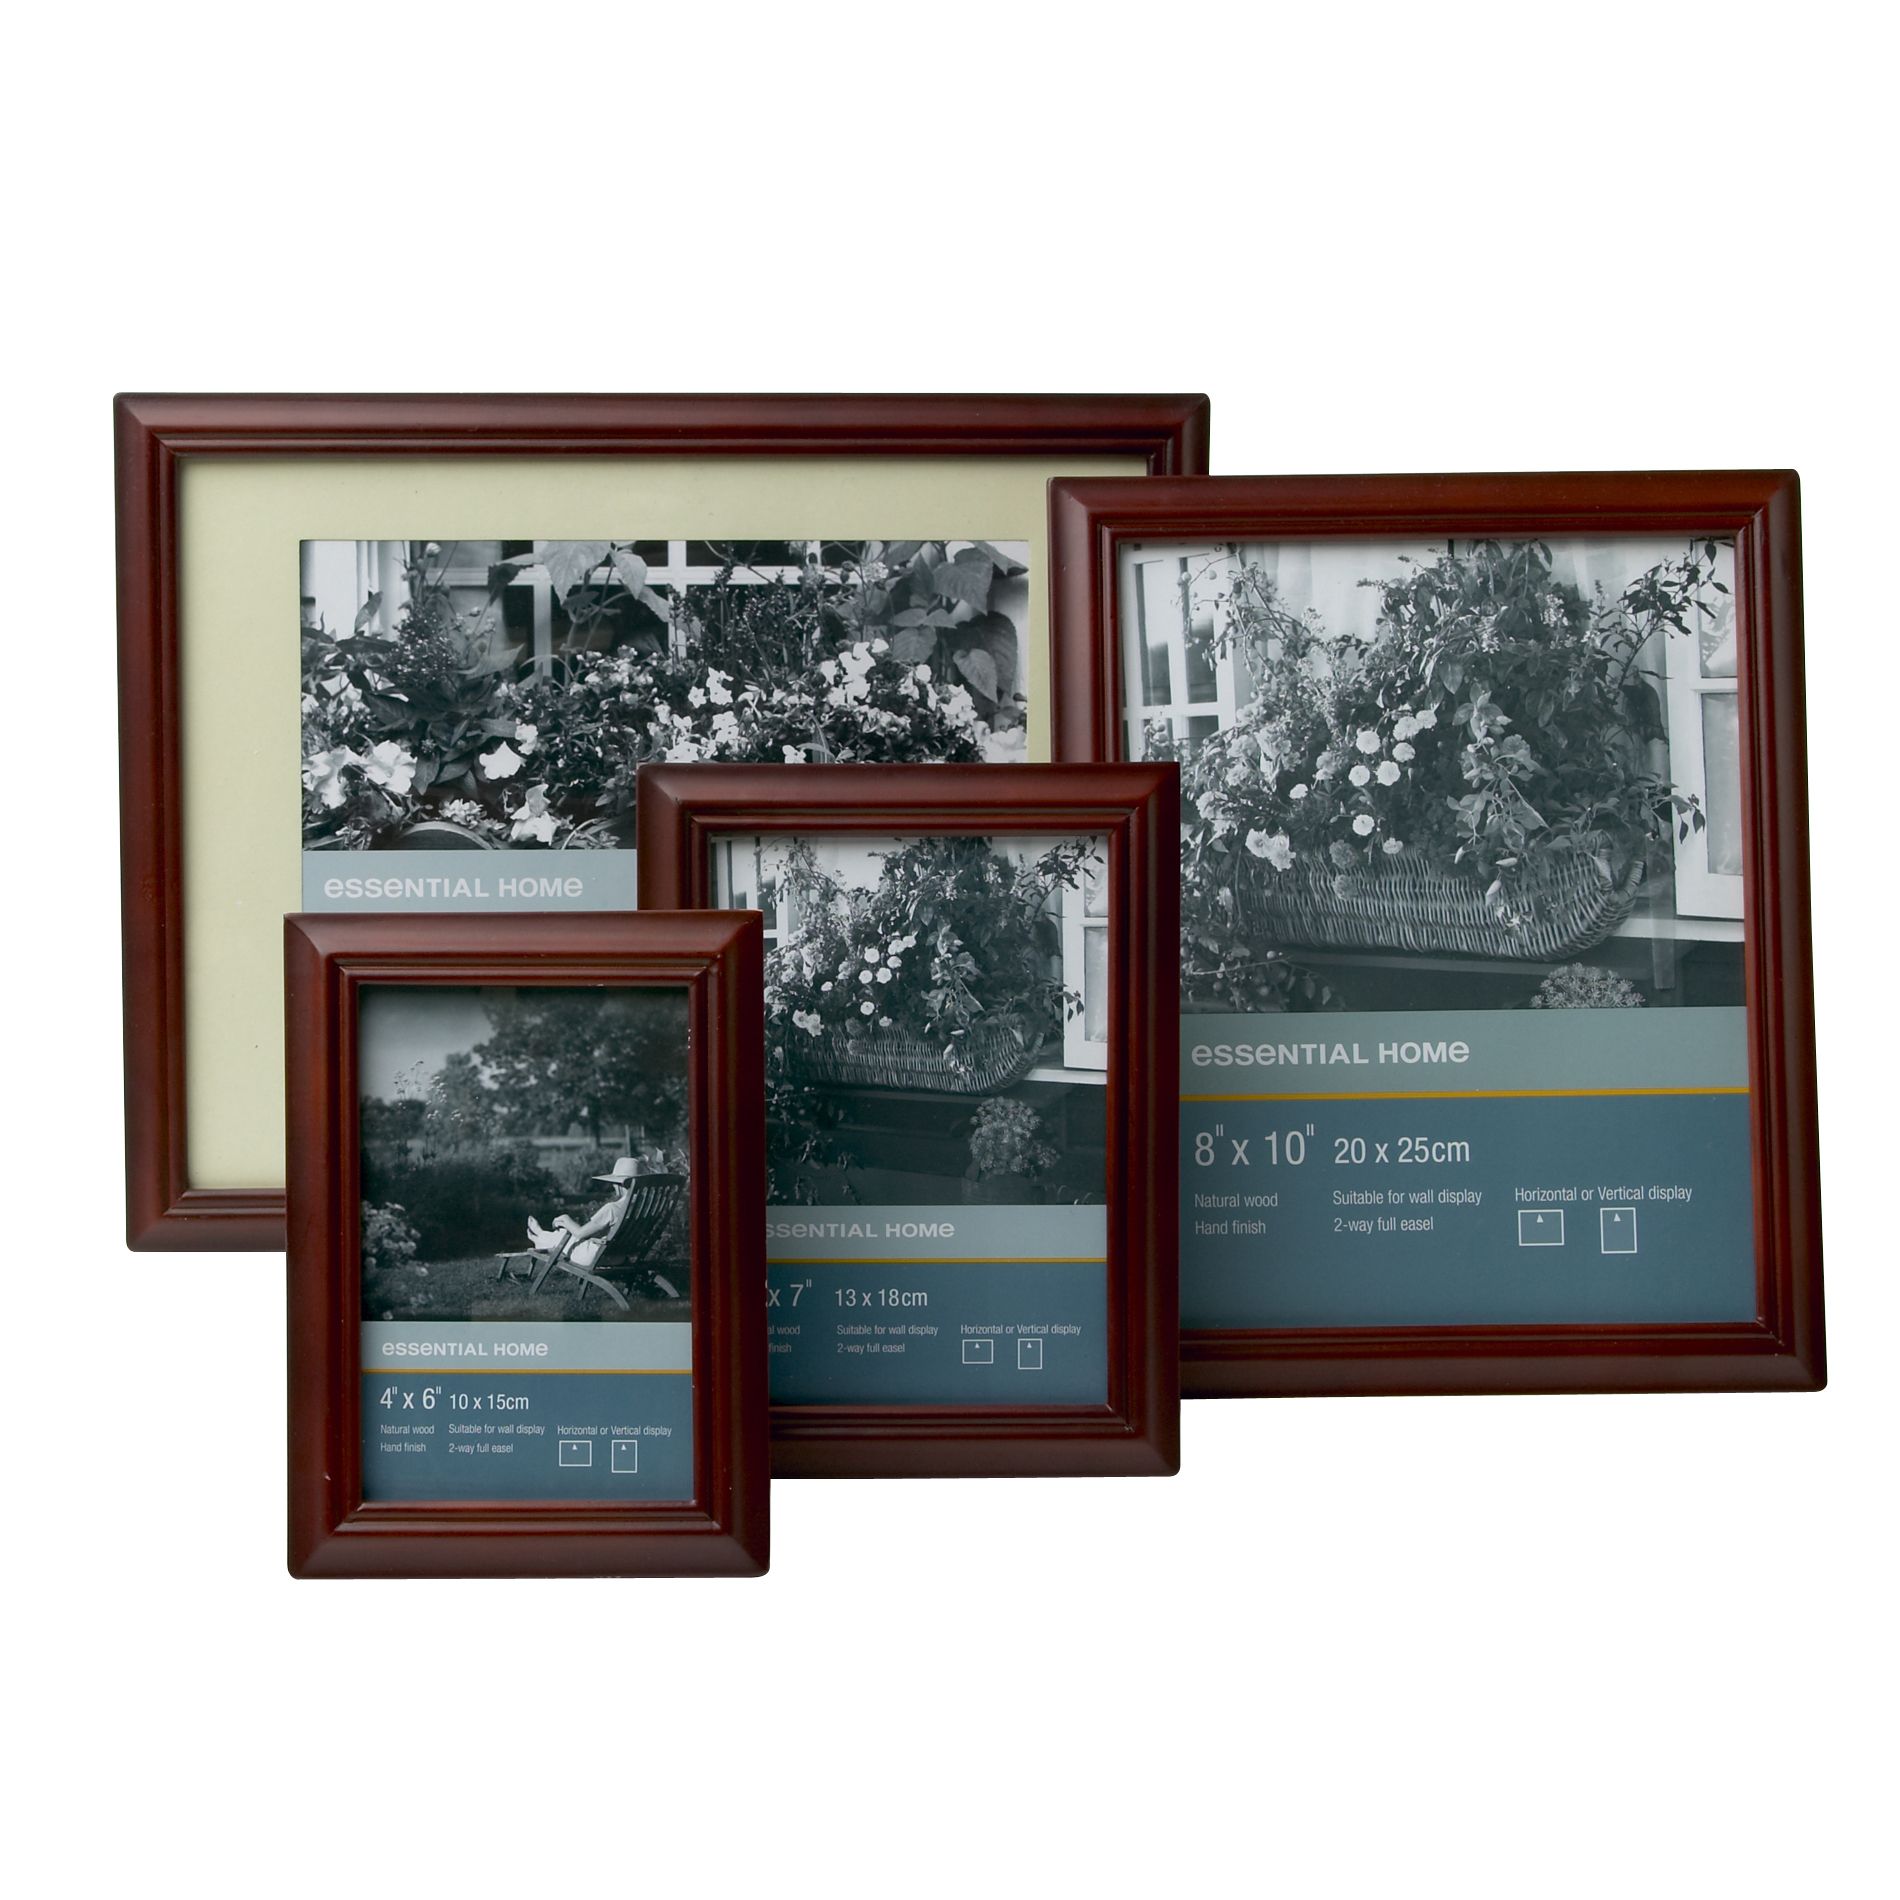 Essential Home Ribbed Mahogany Picture Frame Collection